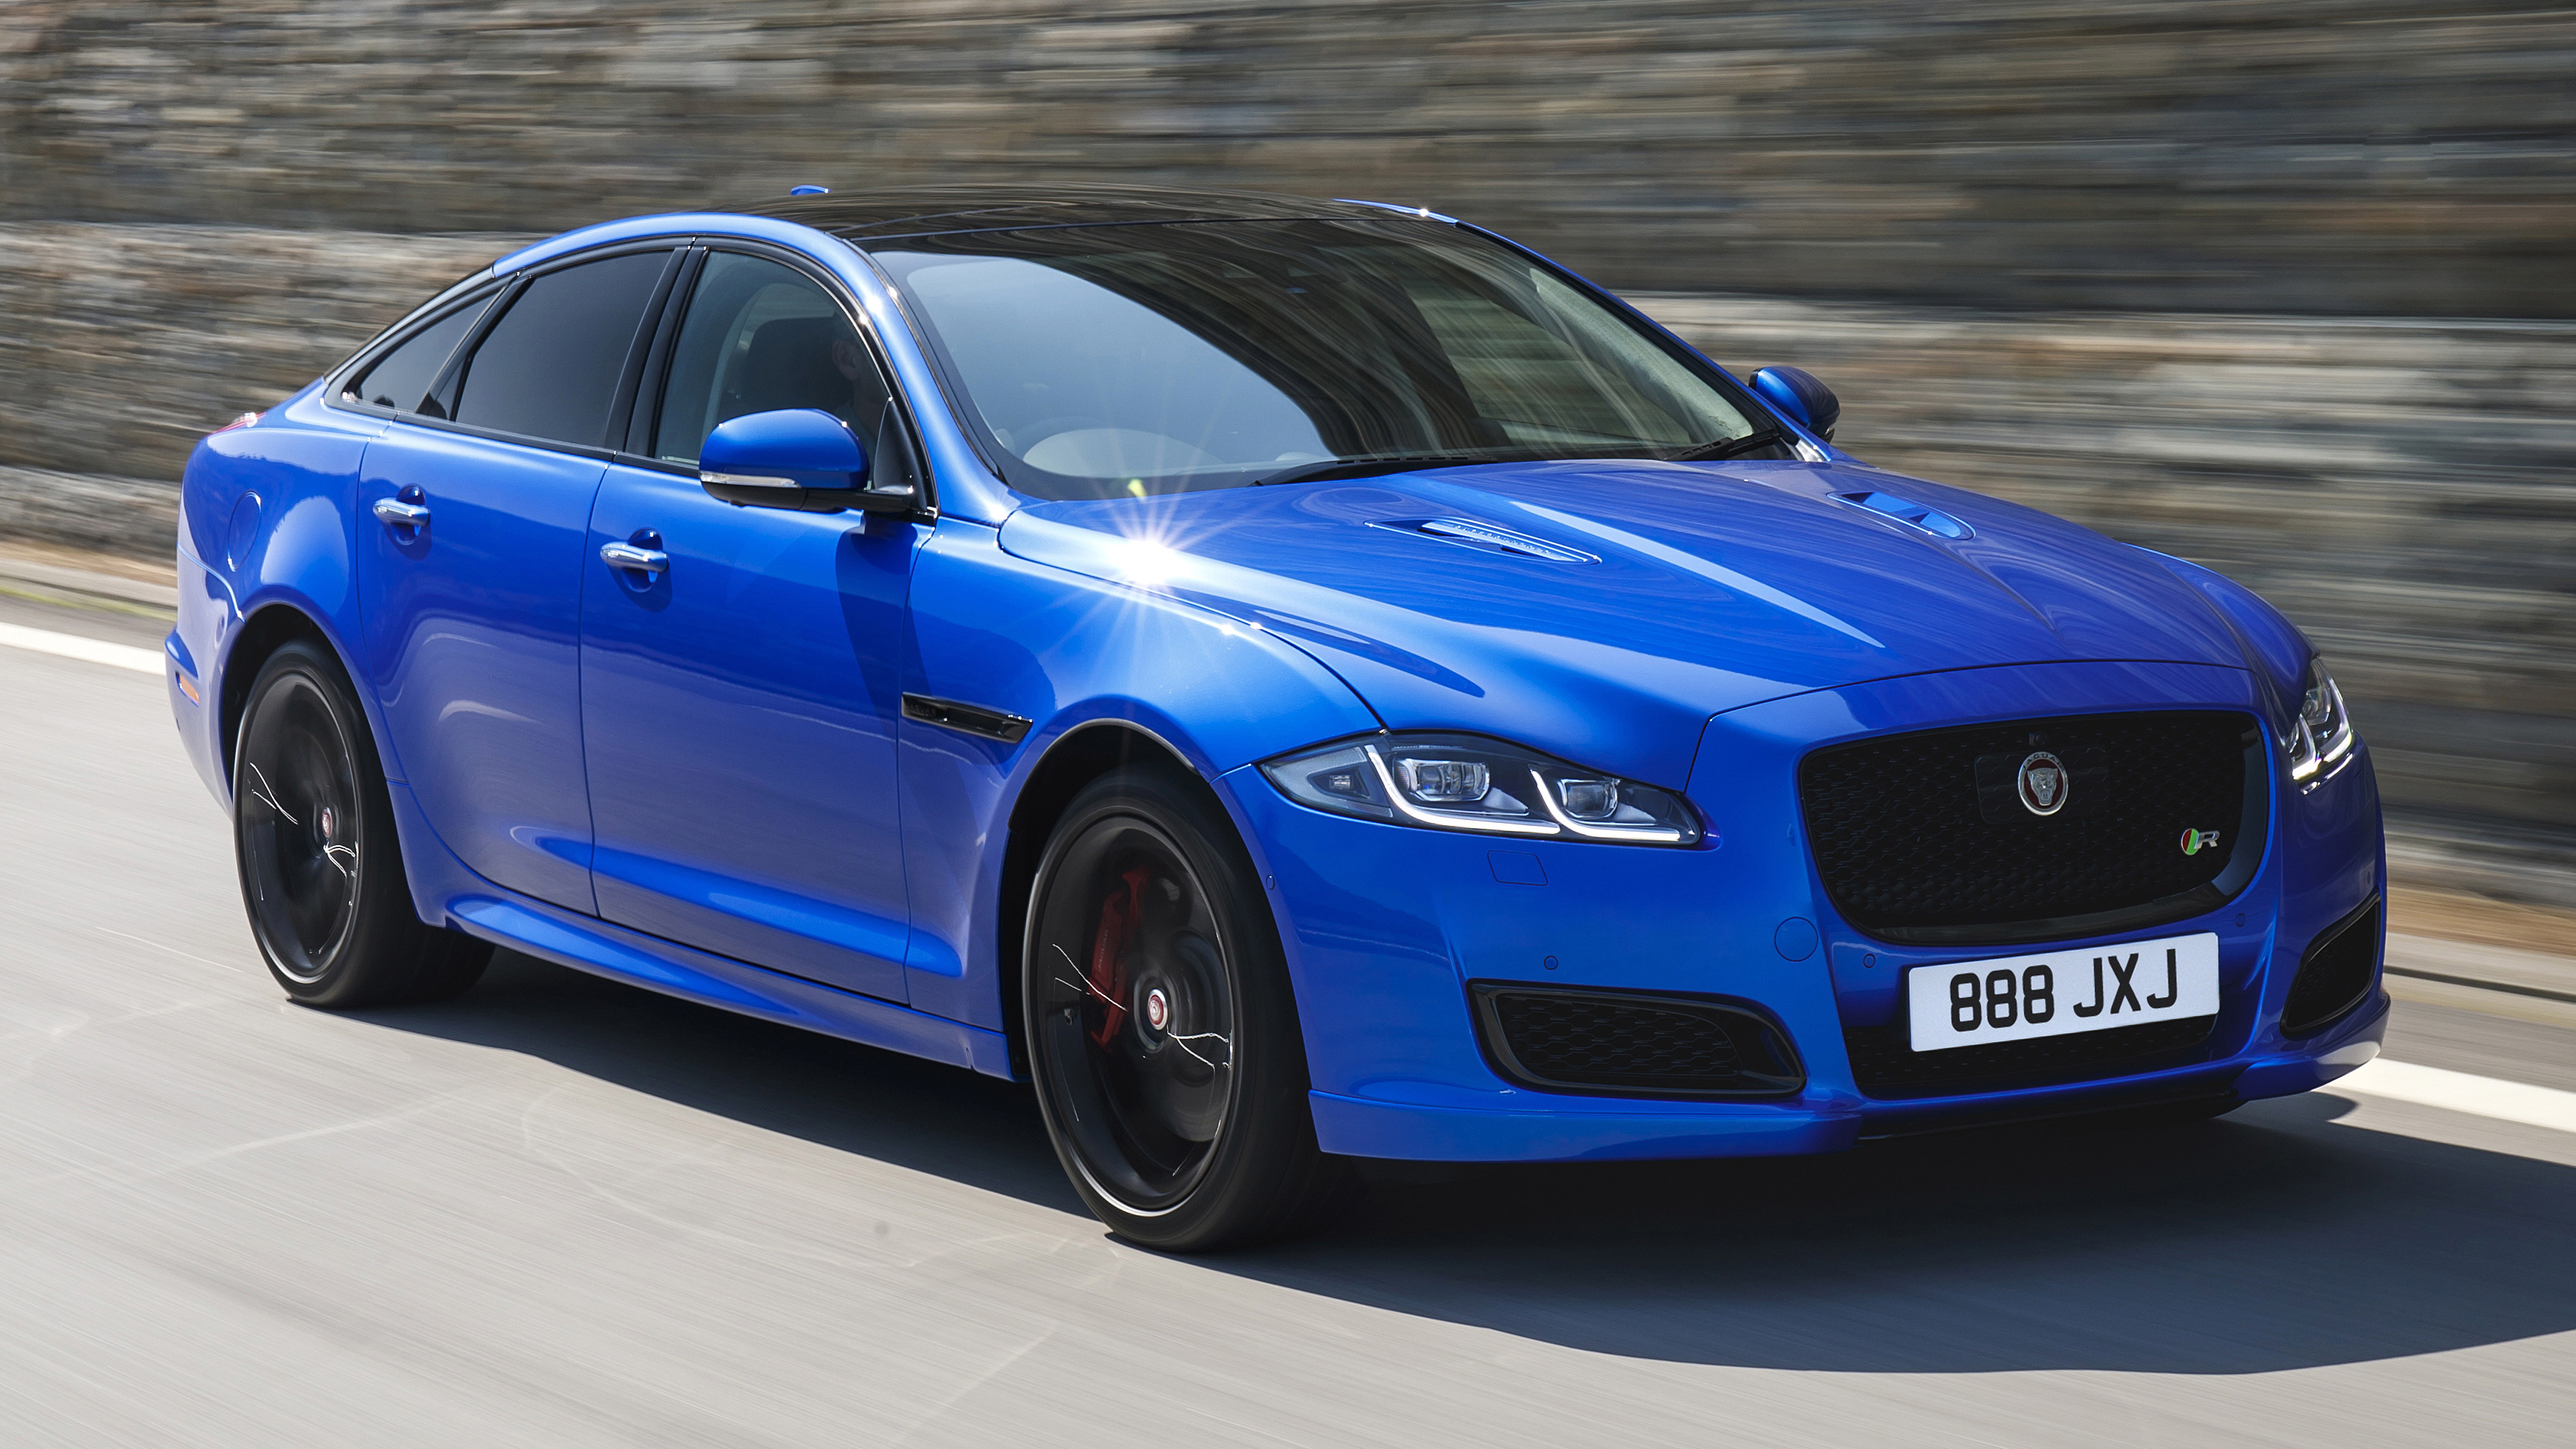 Jaguar XJR 575 review: the most thuggish XJ yet Reviews 2023 | Top Gear